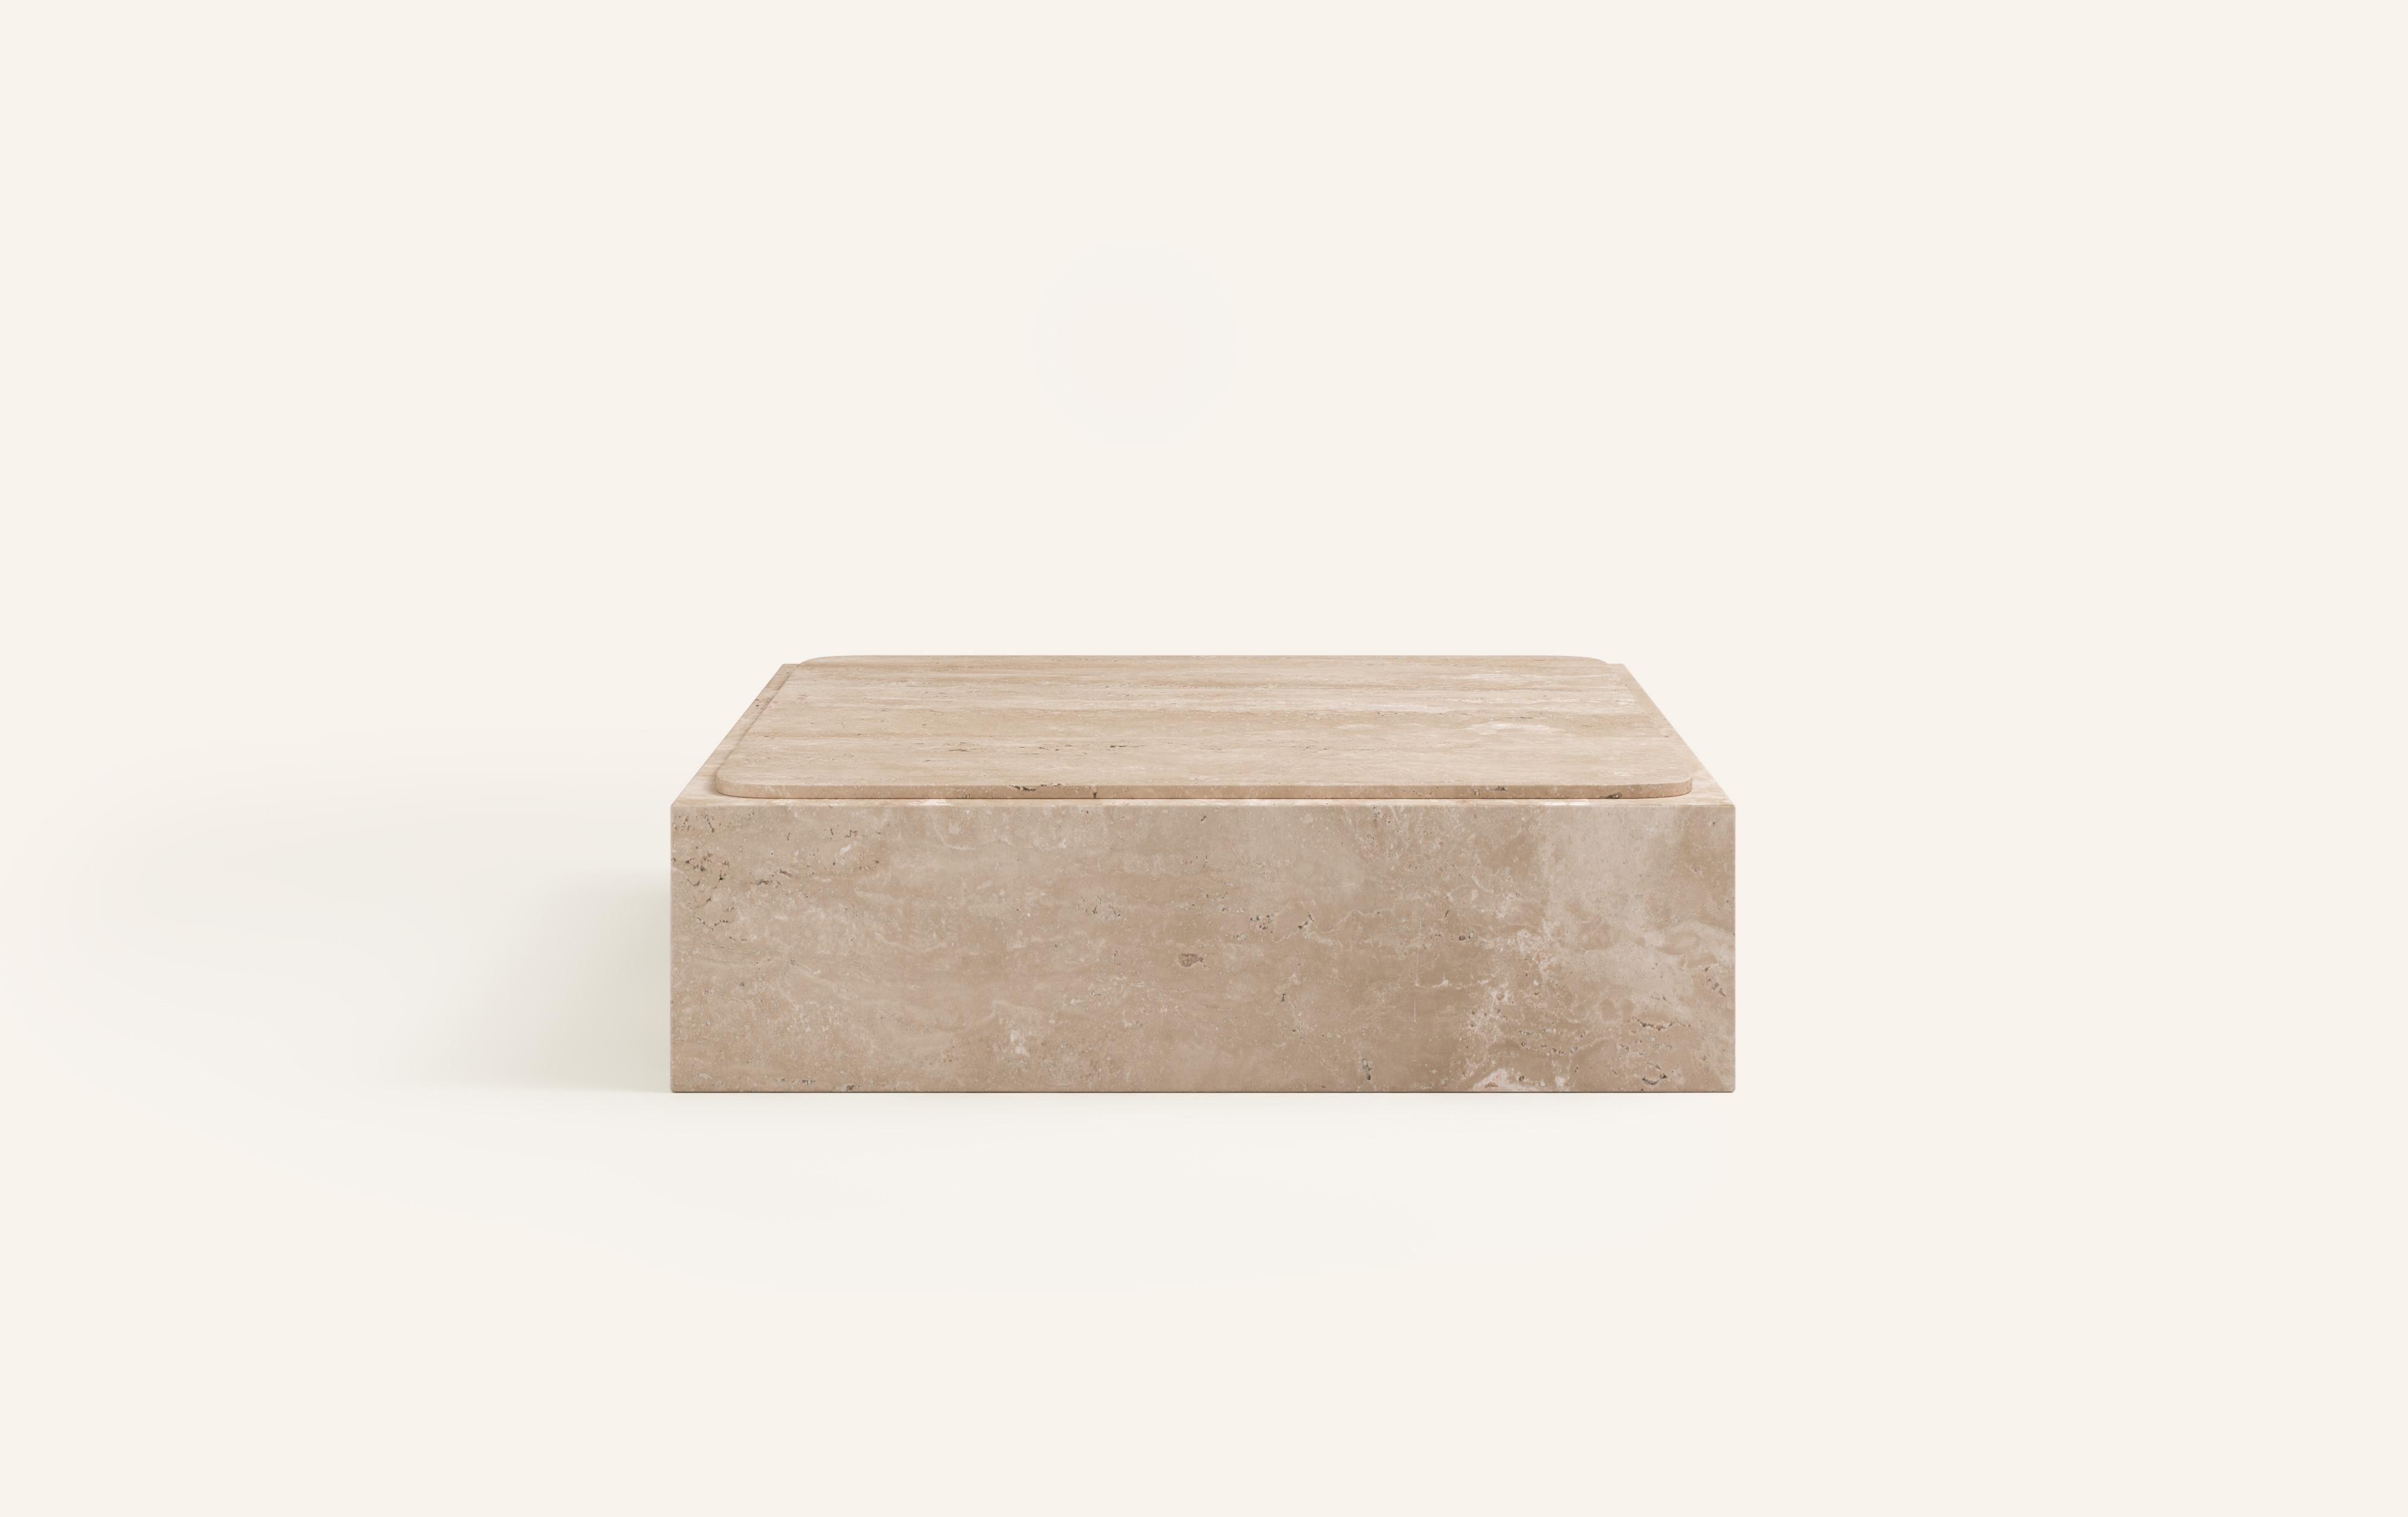 MONOLITHIC FORMS SOFTENED BY GENTLE EDGES. WITH ITS BOLD MARBLE PATTERNS CUBO IS AS VERSATILE AS IT IS STRIKING.

DIMENSIONS:
42”L x 42”W x 13”H: 
- 3/4